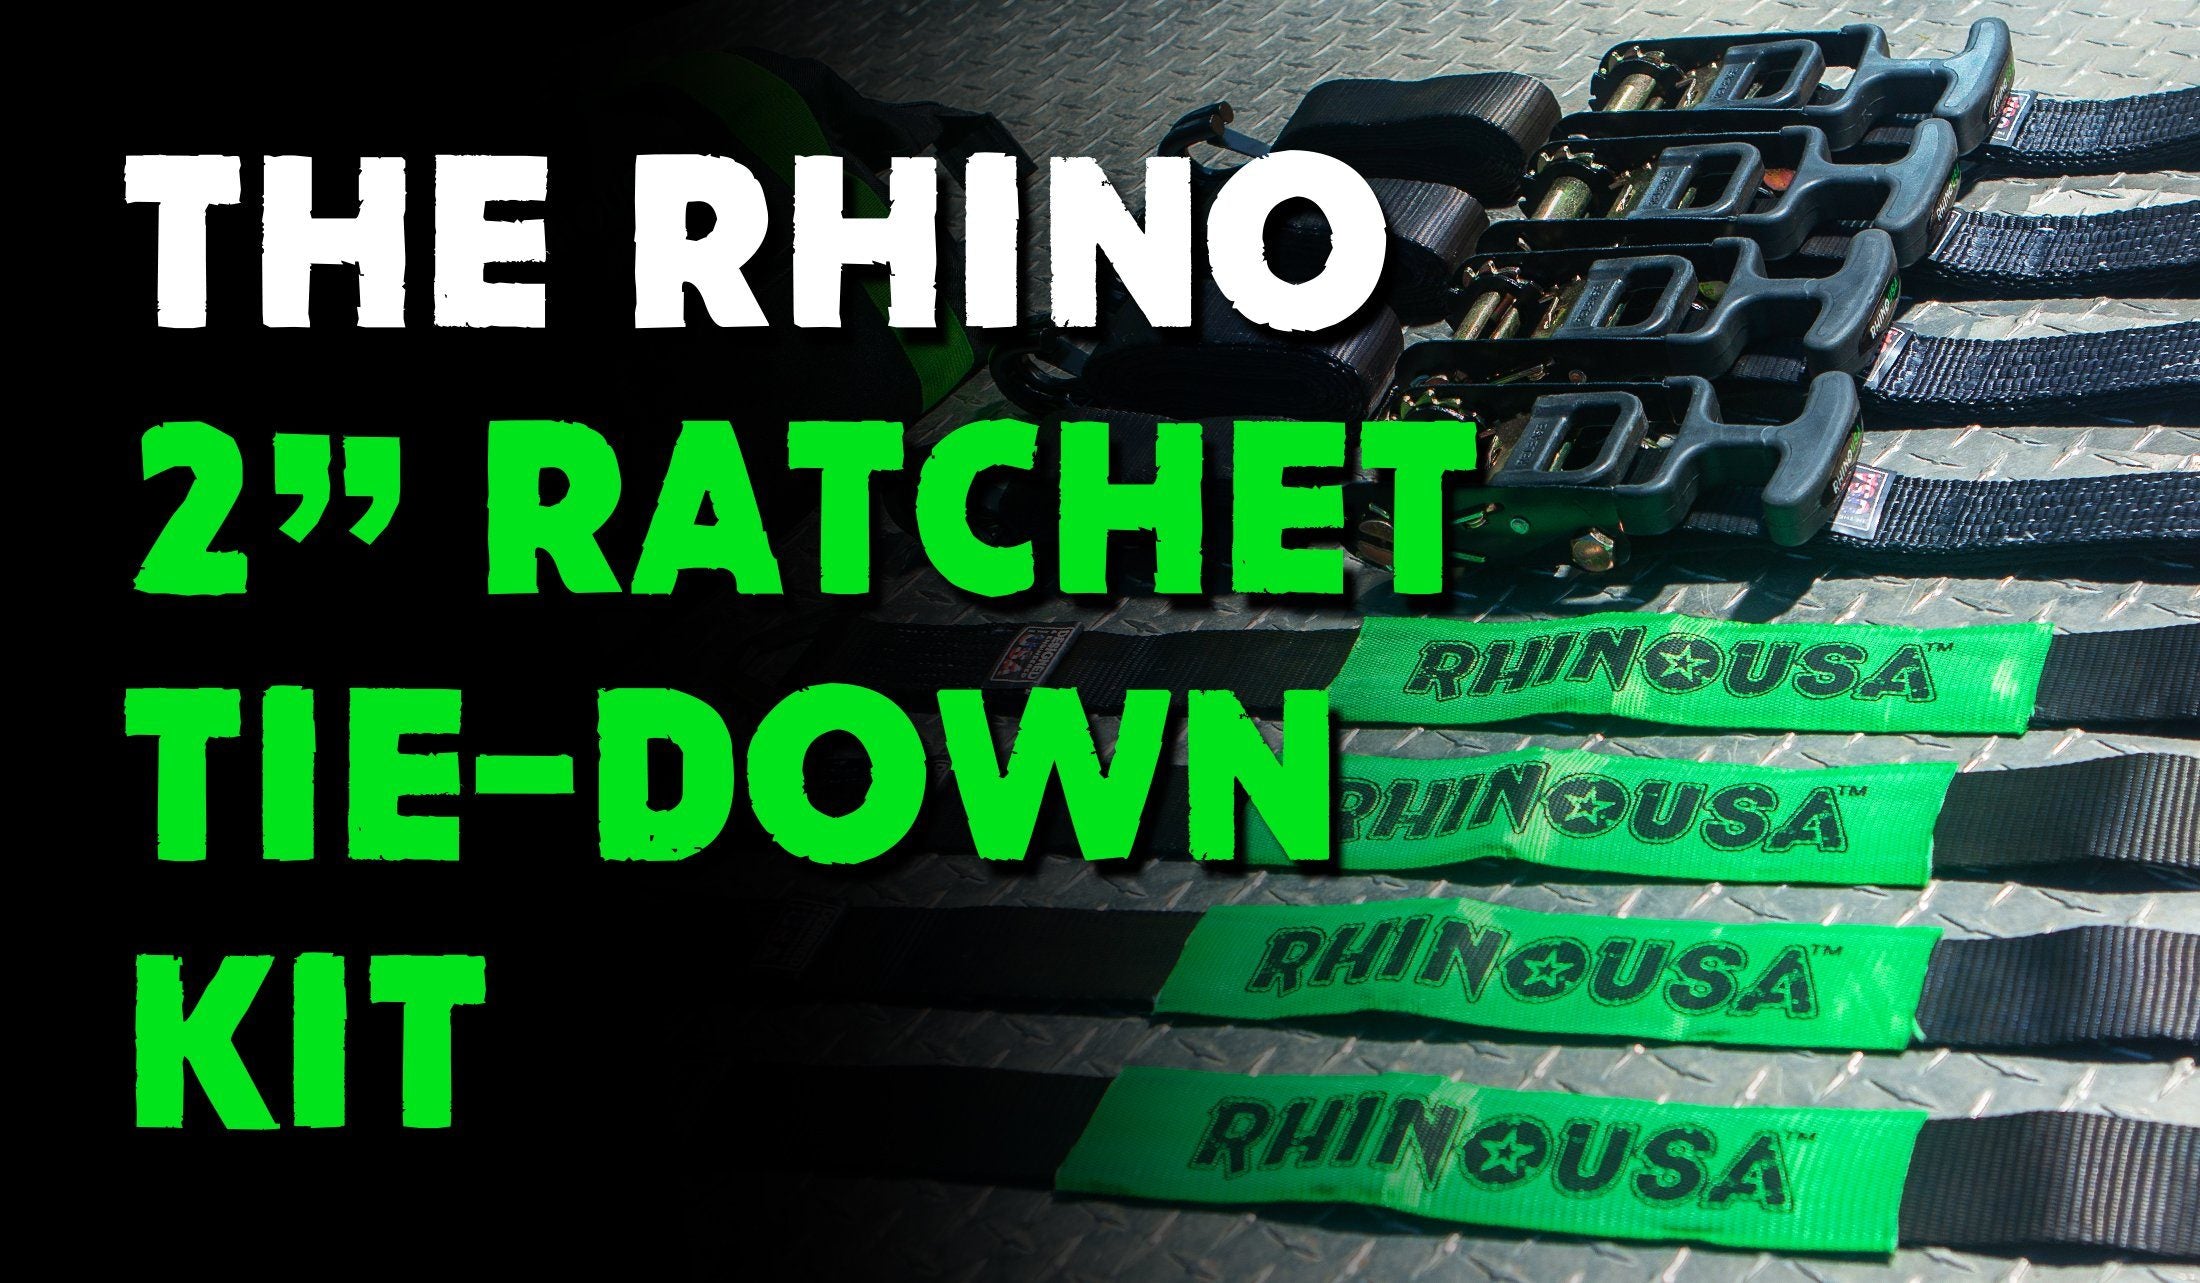 Product Feature: The Rhino USA 4 Pack 2” Ratchet Tie-Down Kit